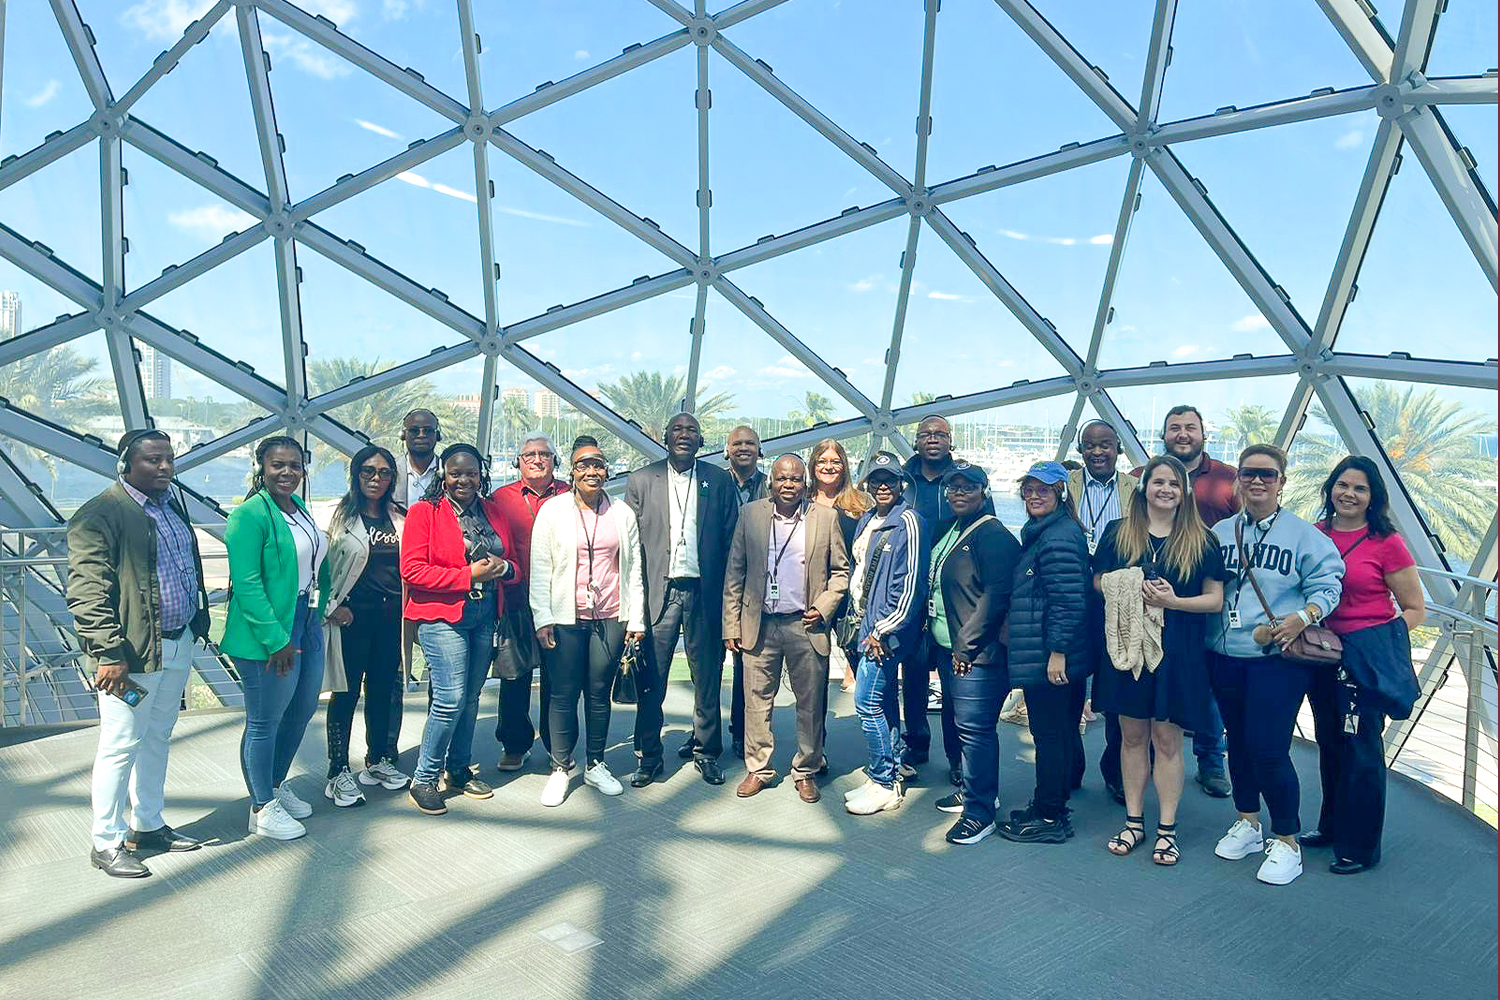 "CCAP South Africa group photo inside The Dali Museum"